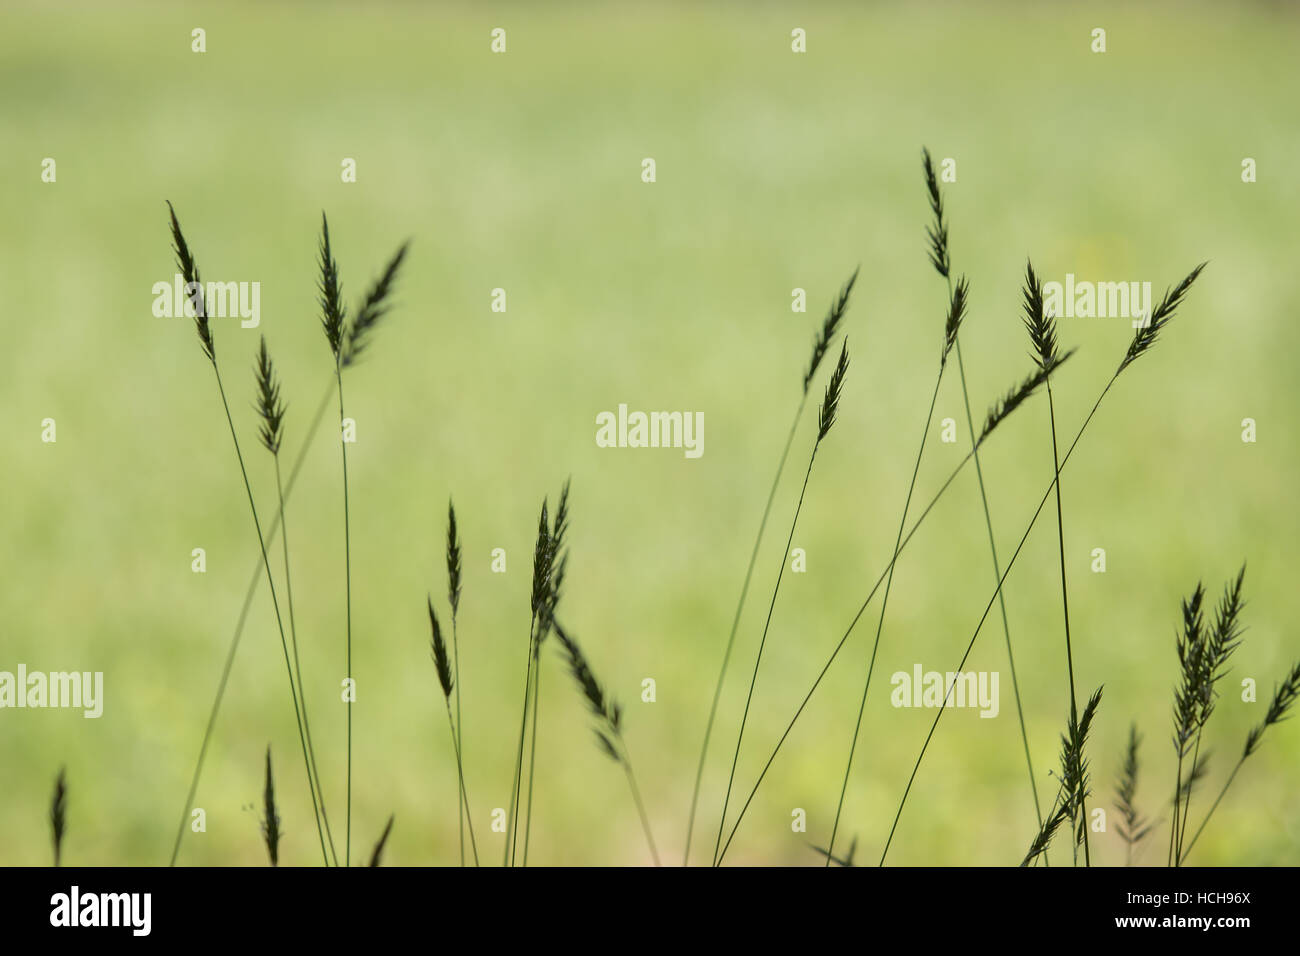 Silhouette of tall seeding grass with de-focused field in the background Stock Photo